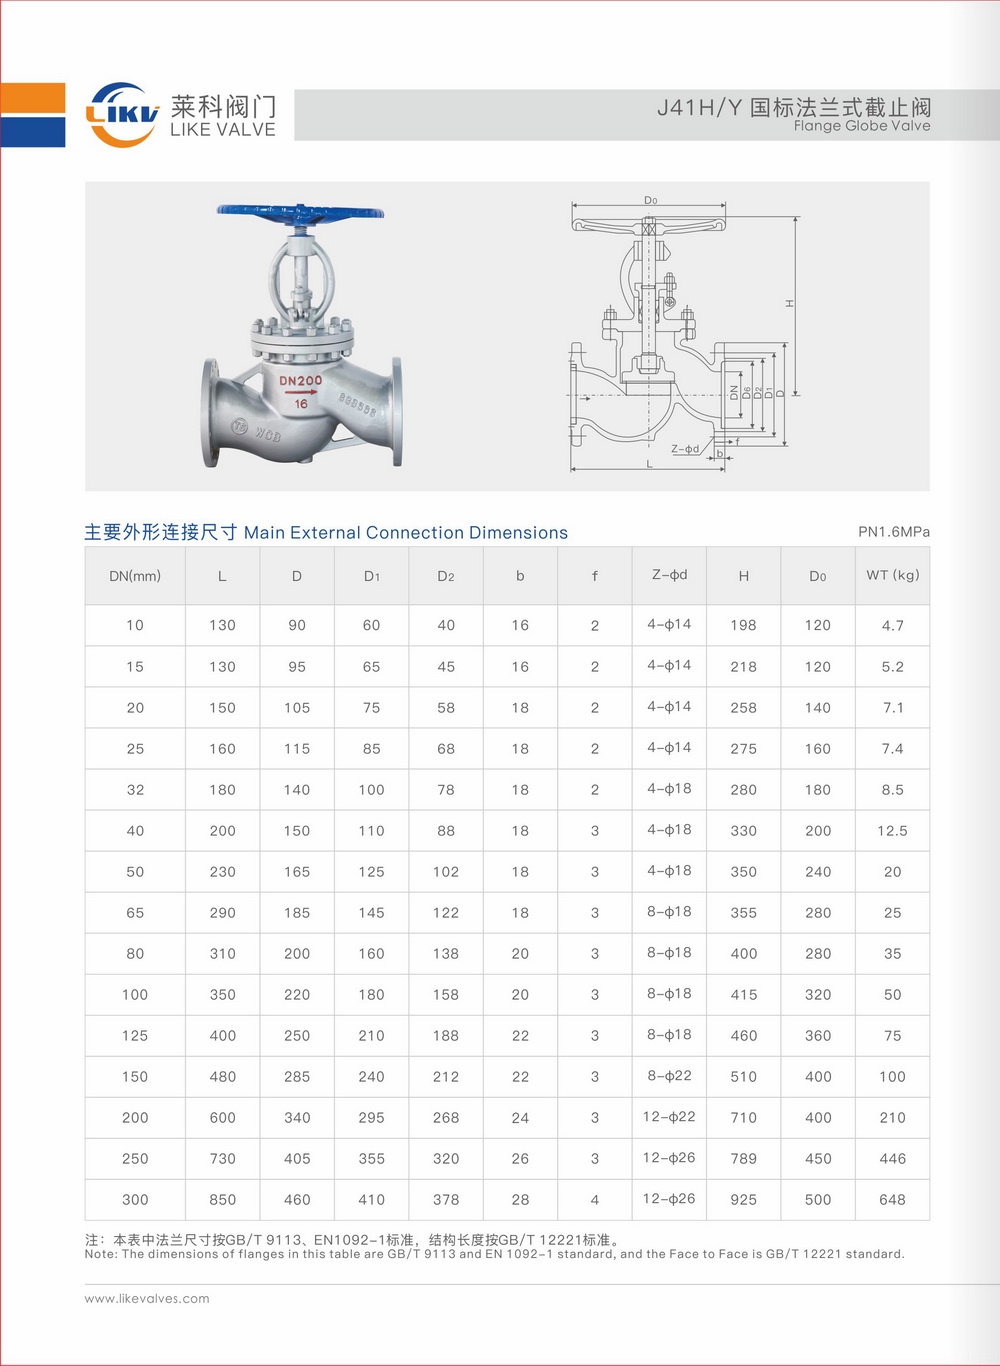 Chinese standard flange globe valve specifications and performance, Chinese produced flange globe valves